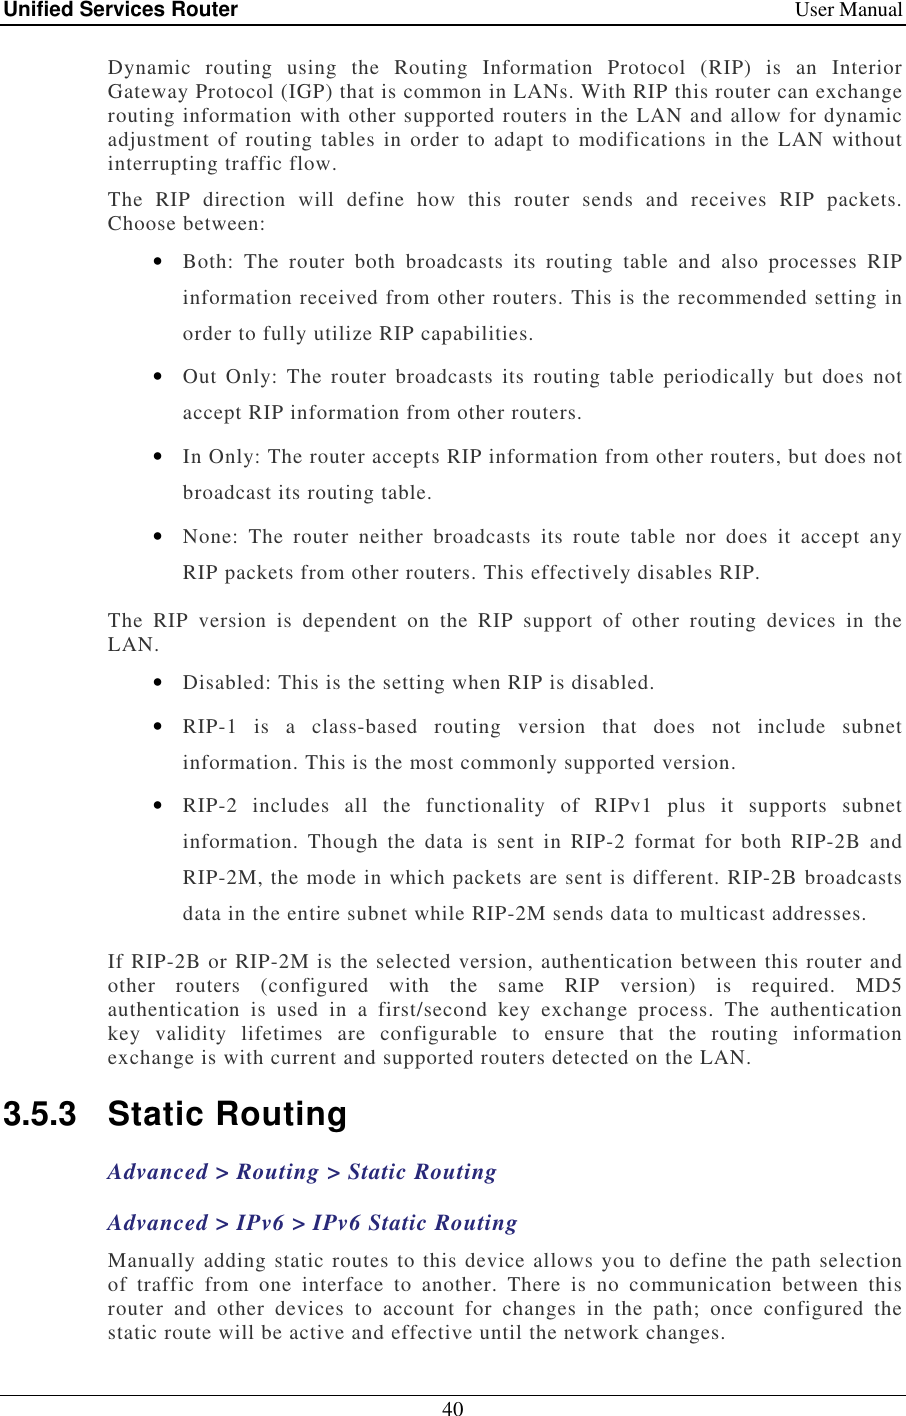 Unified Services Router    User Manual 40  Dynamic  routing  using  the  Routing  Information  Protocol  (RIP)  is  an  Interior Gateway Protocol (IGP) that is common in LANs. With RIP this router can exchange routing information with other supported routers in the LAN and allow for dynamic adjustment of routing tables  in order to  adapt  to  modifications in  the LAN without interrupting traffic flow.  The  RIP  direction  will  define  how  this  router  sends  and  receives  RIP  packets. Choose between: • Both:  The  router  both  broadcasts  its  routing  table  and  also  processes  RIP information received from other routers. This is the recommended setting in order to fully utilize RIP capabilities. • Out  Only:  The  router broadcasts  its  routing  table periodically  but  does  not accept RIP information from other routers.  • In Only: The router accepts RIP information from other routers, but does not broadcast its routing table. • None:  The  router  neither  broadcasts  its  route  table  nor  does  it  accept  any RIP packets from other routers. This effectively disables RIP. The  RIP  version  is  dependent  on  the  RIP  support  of  other  routing  devices  in  the LAN.  • Disabled: This is the setting when RIP is disabled.  • RIP-1  is  a  class-based  routing  version  that  does  not  include  subnet information. This is the most commonly supported version.  • RIP-2  includes  all  the  functionality  of  RIPv1  plus  it  supports  subnet information.  Though  the  data  is  sent  in  RIP-2  format  for  both  RIP-2B  and RIP-2M, the mode in which packets are sent is different. RIP-2B broadcasts data in the entire subnet while RIP-2M sends data to multicast addresses.  If RIP-2B or RIP-2M is the selected version, authentication between this router and other  routers  (configured  with  the  same  RIP  version)  is  required.  MD5 authentication  is  used  in  a  first/second  key  exchange  process.  The  authentication key  validity  lifetimes  are  configurable  to  ensure  that  the  routing  information exchange is with current and supported routers detected on the LAN. 3.5.3  Static Routing Advanced &gt; Routing &gt; Static Routing Advanced &gt; IPv6 &gt; IPv6 Static Routing Manually adding static routes to this device allows you to define the path selection of  traffic  from  one  interface  to  another.  There  is  no  communication  between  this router  and  other  devices  to  account  for  changes  in  the  path;  once  configured  the static route will be active and effective until the network changes.  